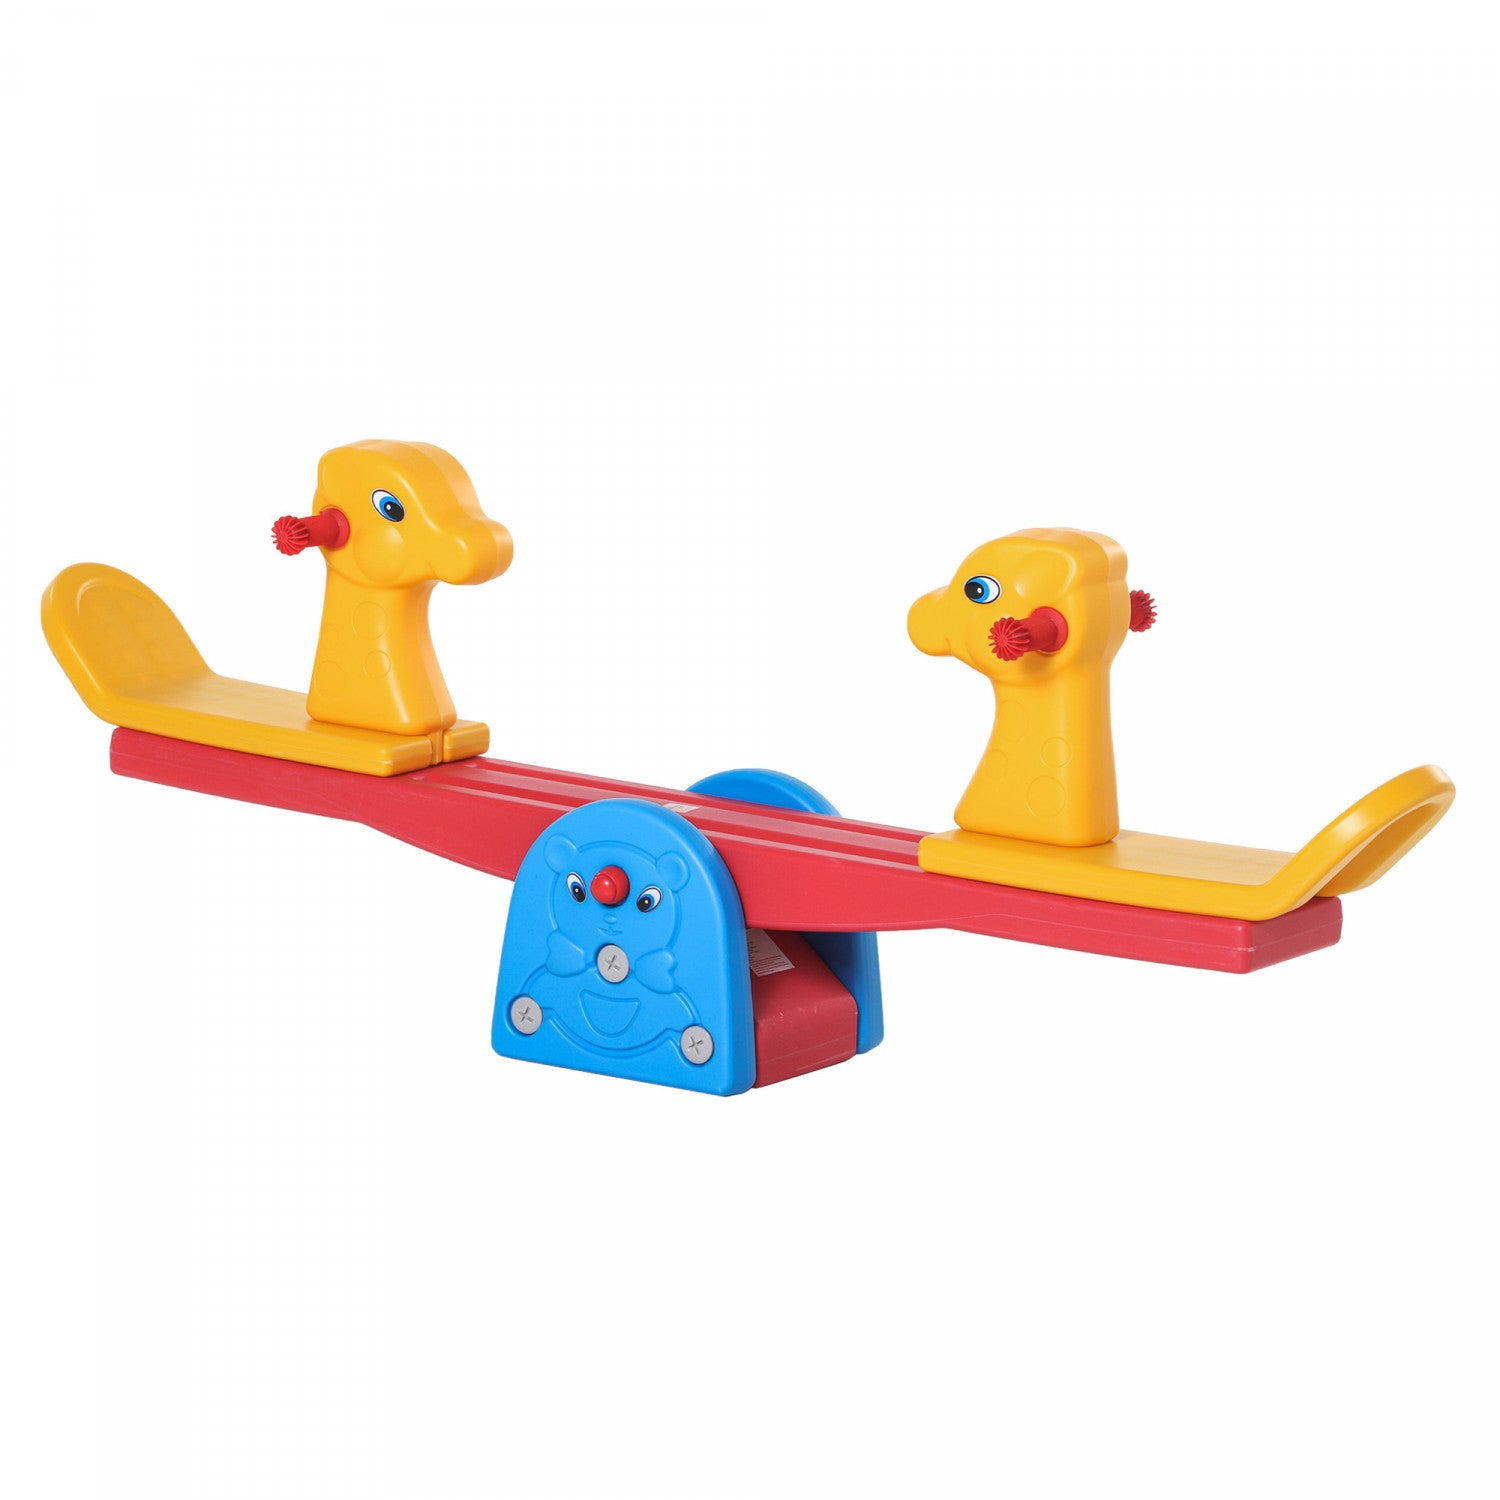 Qaba Kids Seesaw Safe Teeter Totter 2 Seats With Easy-grip Handles 